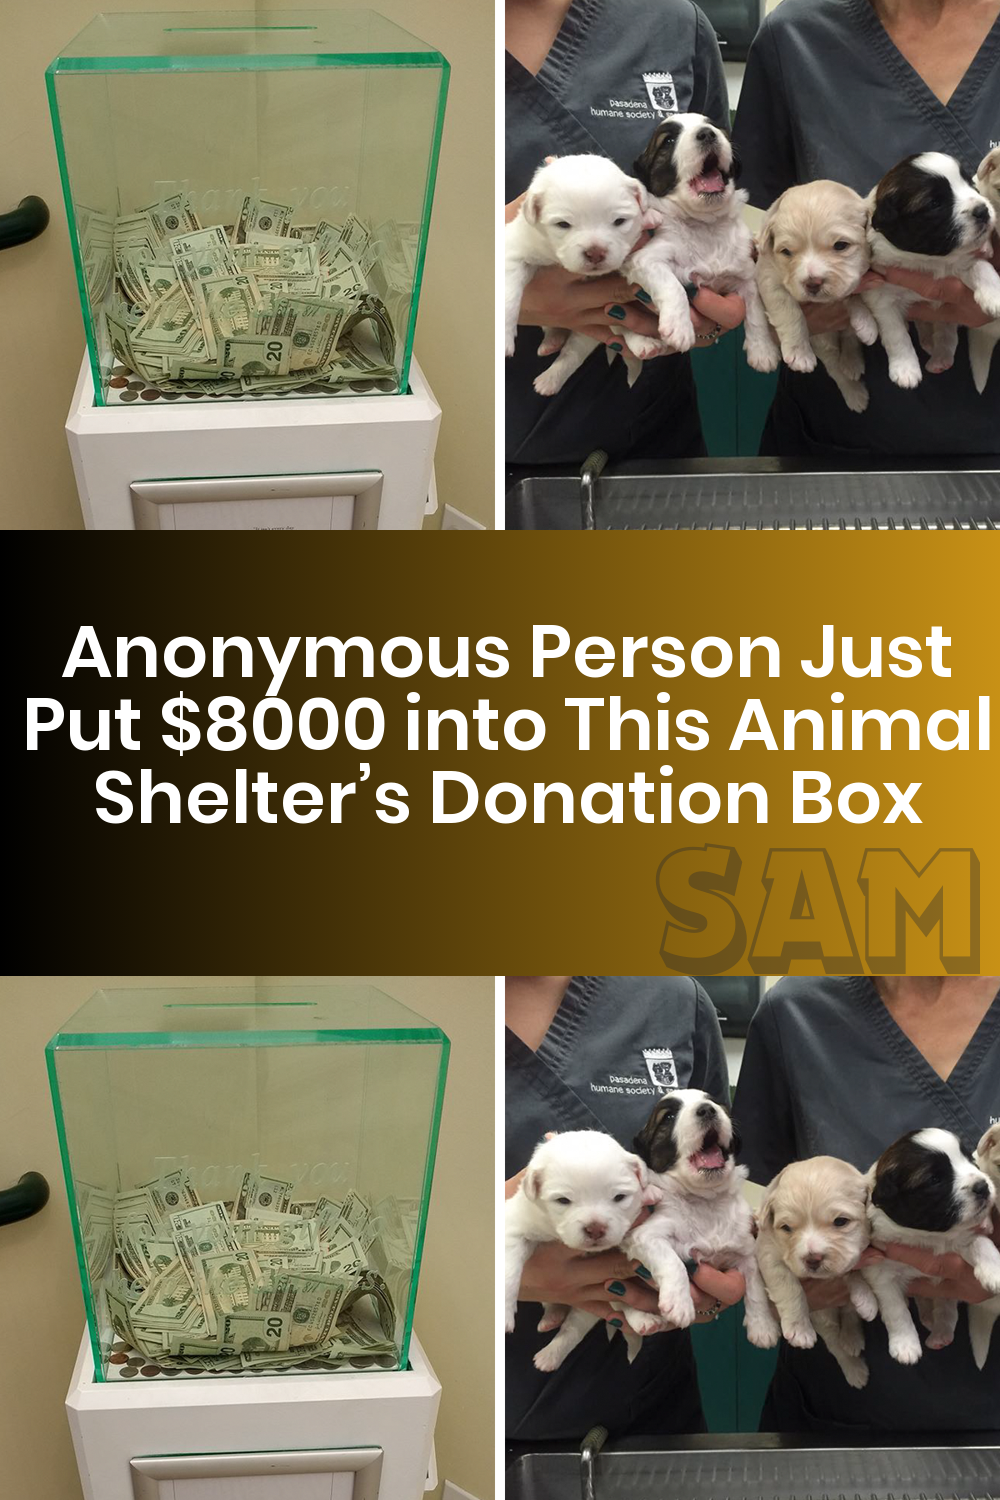 Anonymous Person Just Put $8,000 into This Animal Shelter’s Donation Box